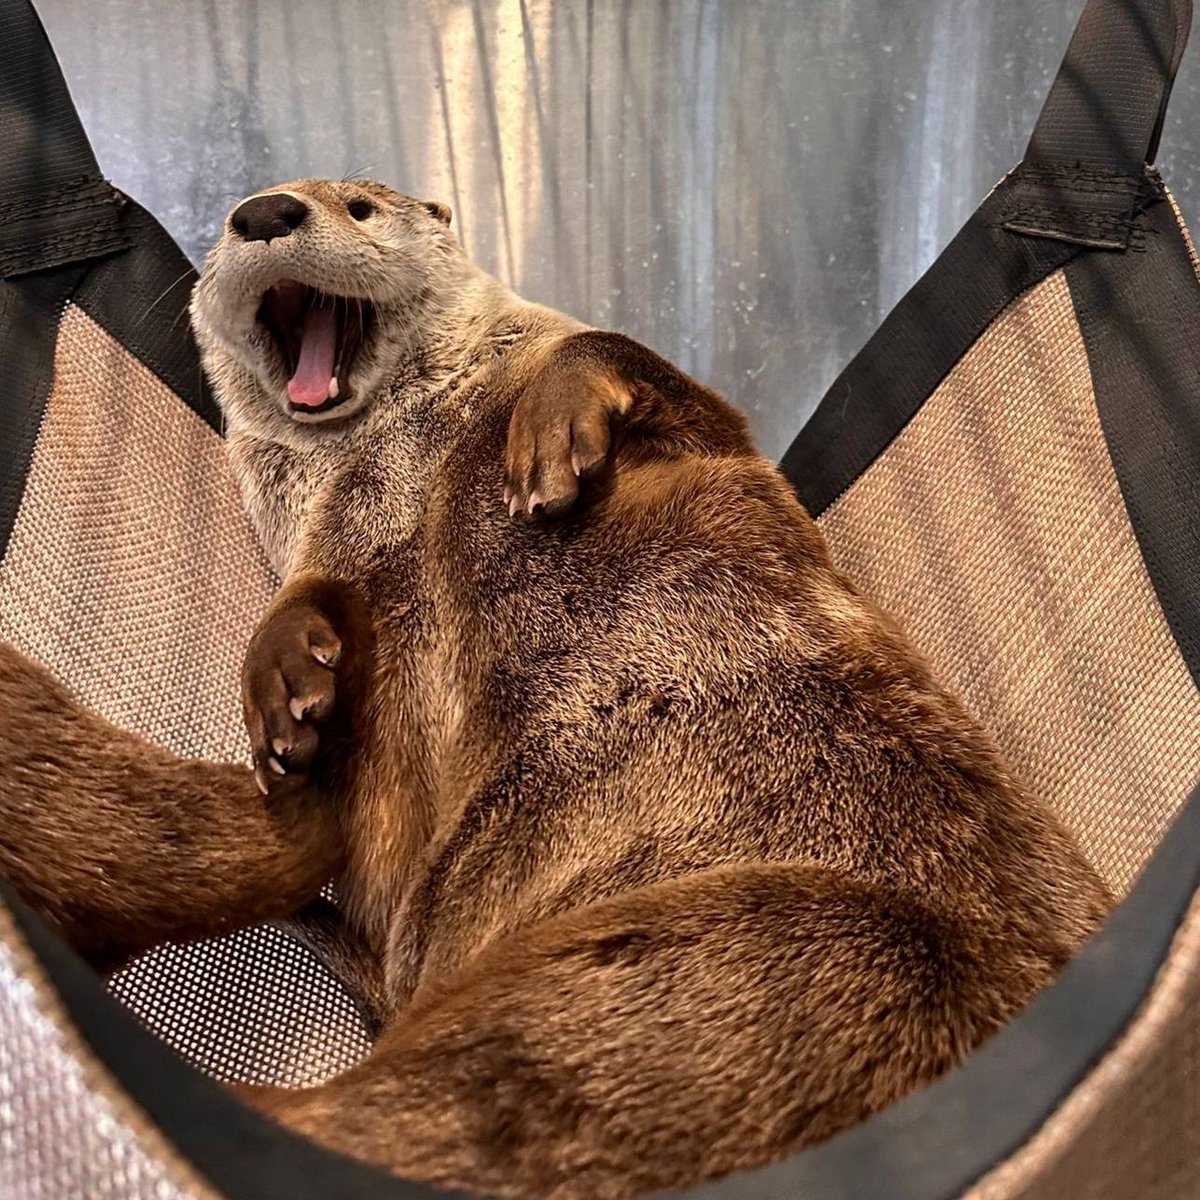 It's time to say bon voyage to female North American river otter, ‘Maybelle’! 👏 She is heading off to another accredited zoo to start a new adventure. 🦦 This week is your last chance to visit Maybelle, so be sure to stop by to bid her adieu before she departs! #YourZooYYC